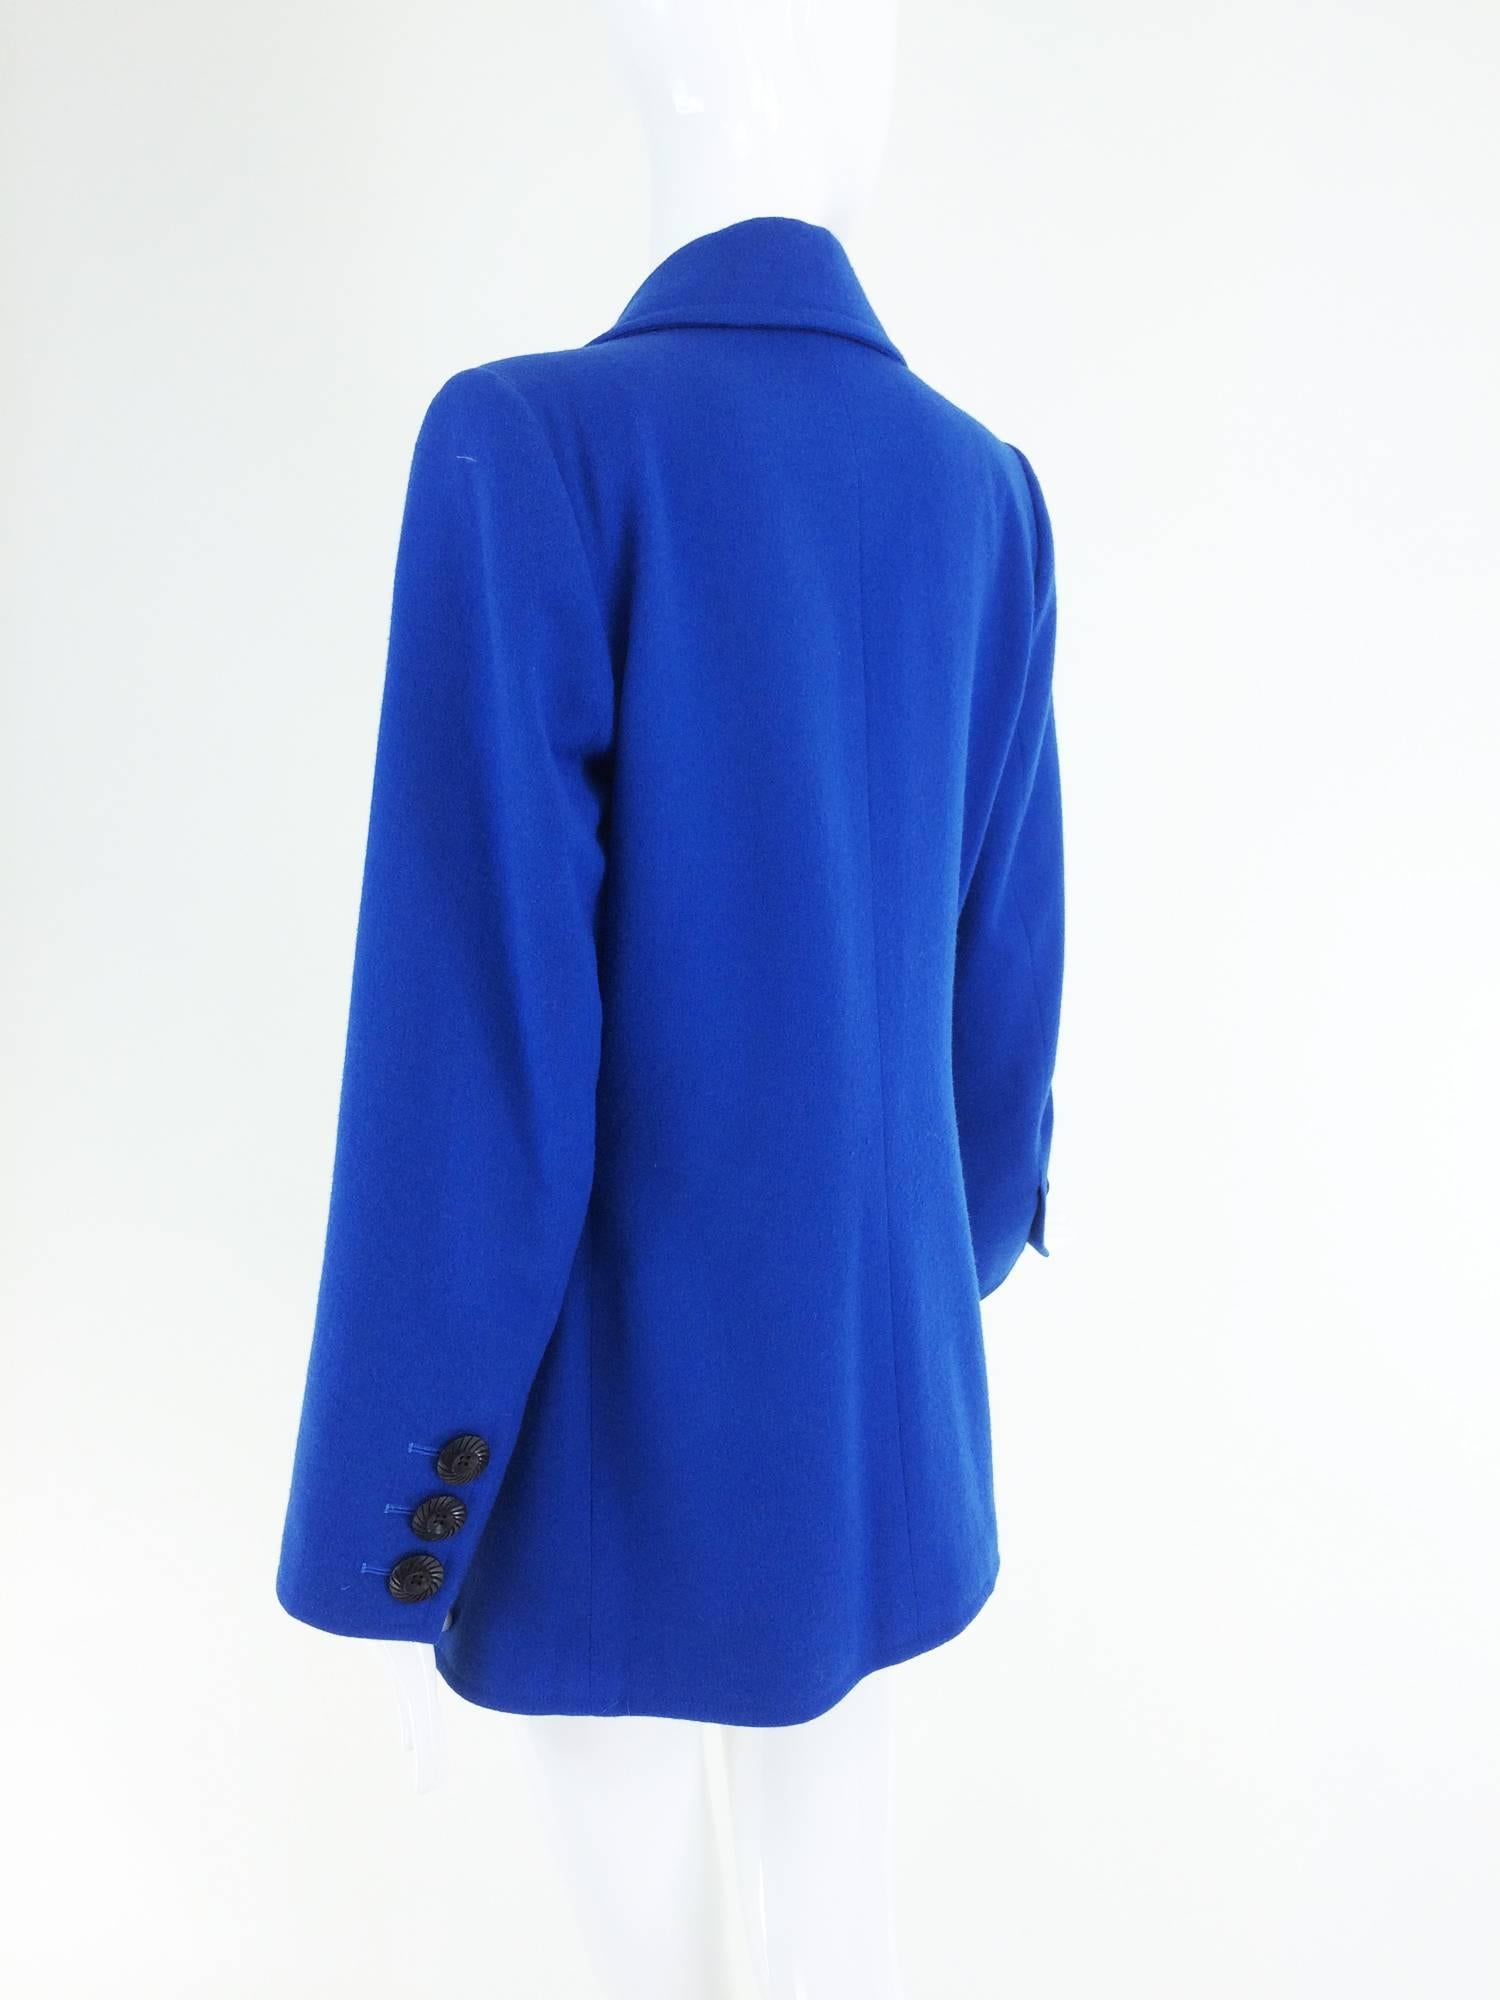 Yves St Laurent Rive Gauche bright blue wool pea coat 1990s In Excellent Condition In West Palm Beach, FL